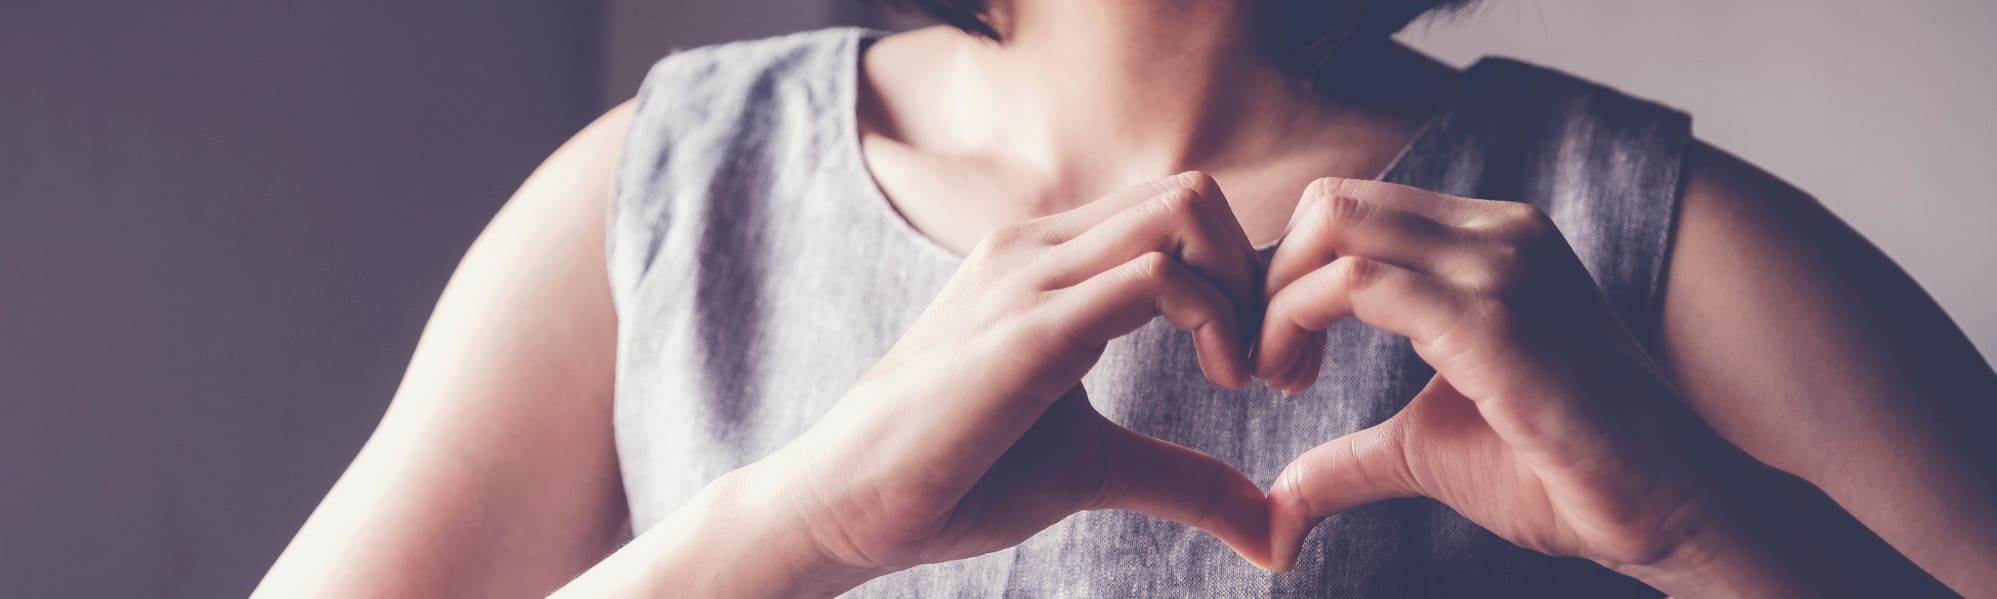 A close up of someone doing a heart symbol with their hands